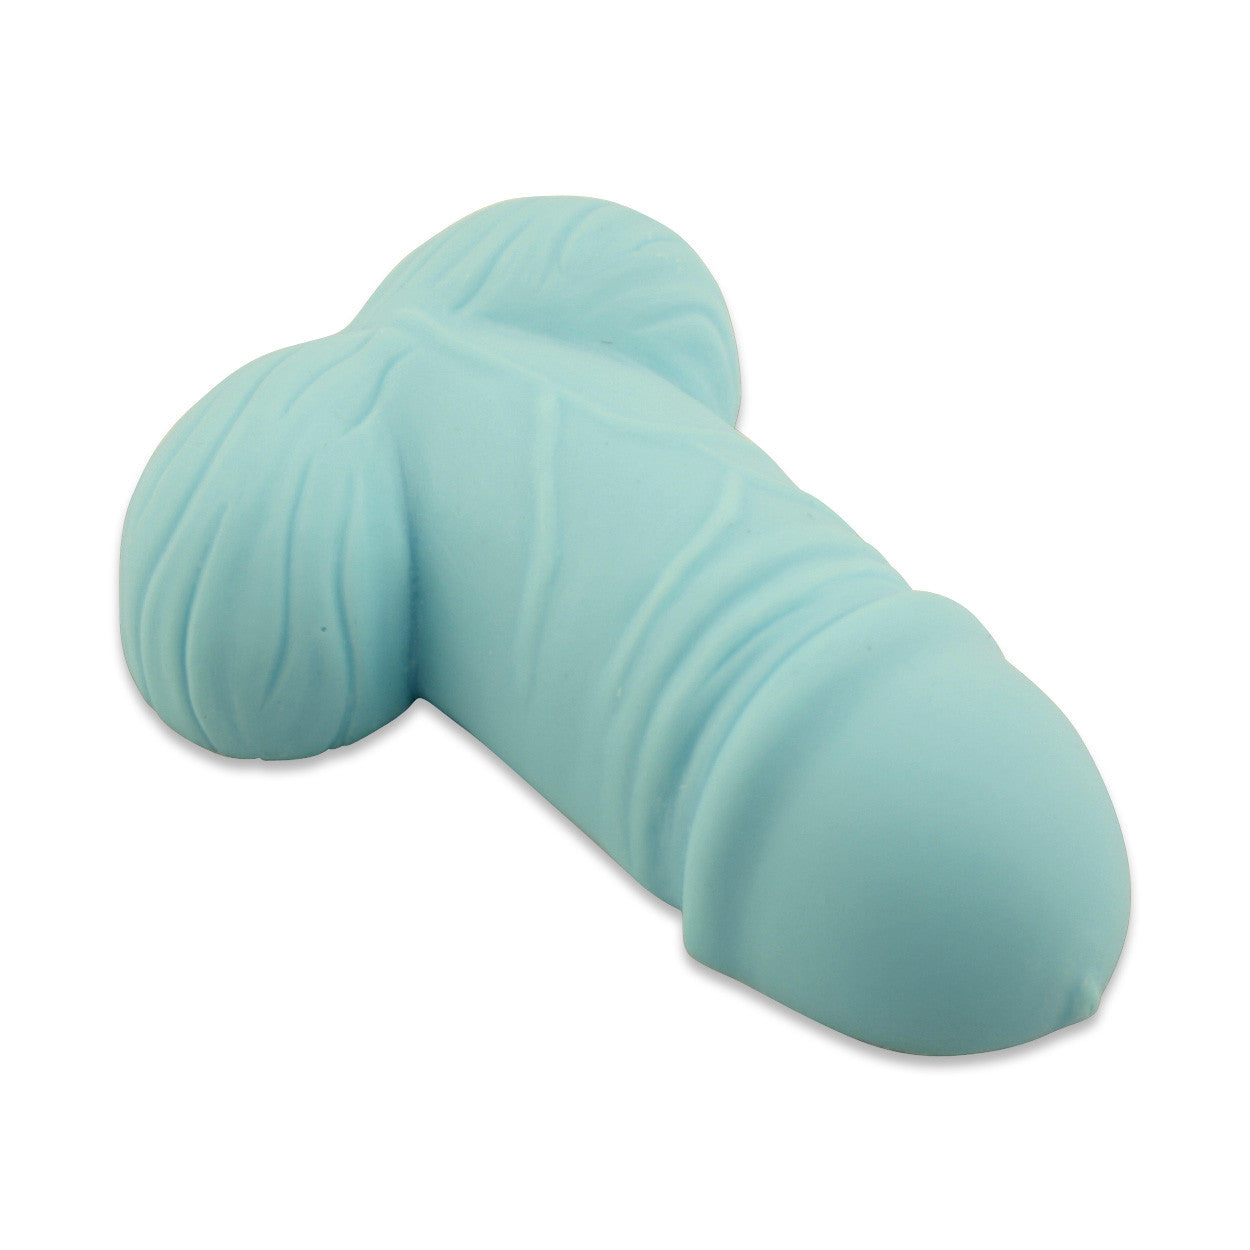 Image of Veiny Chode Penis Soap